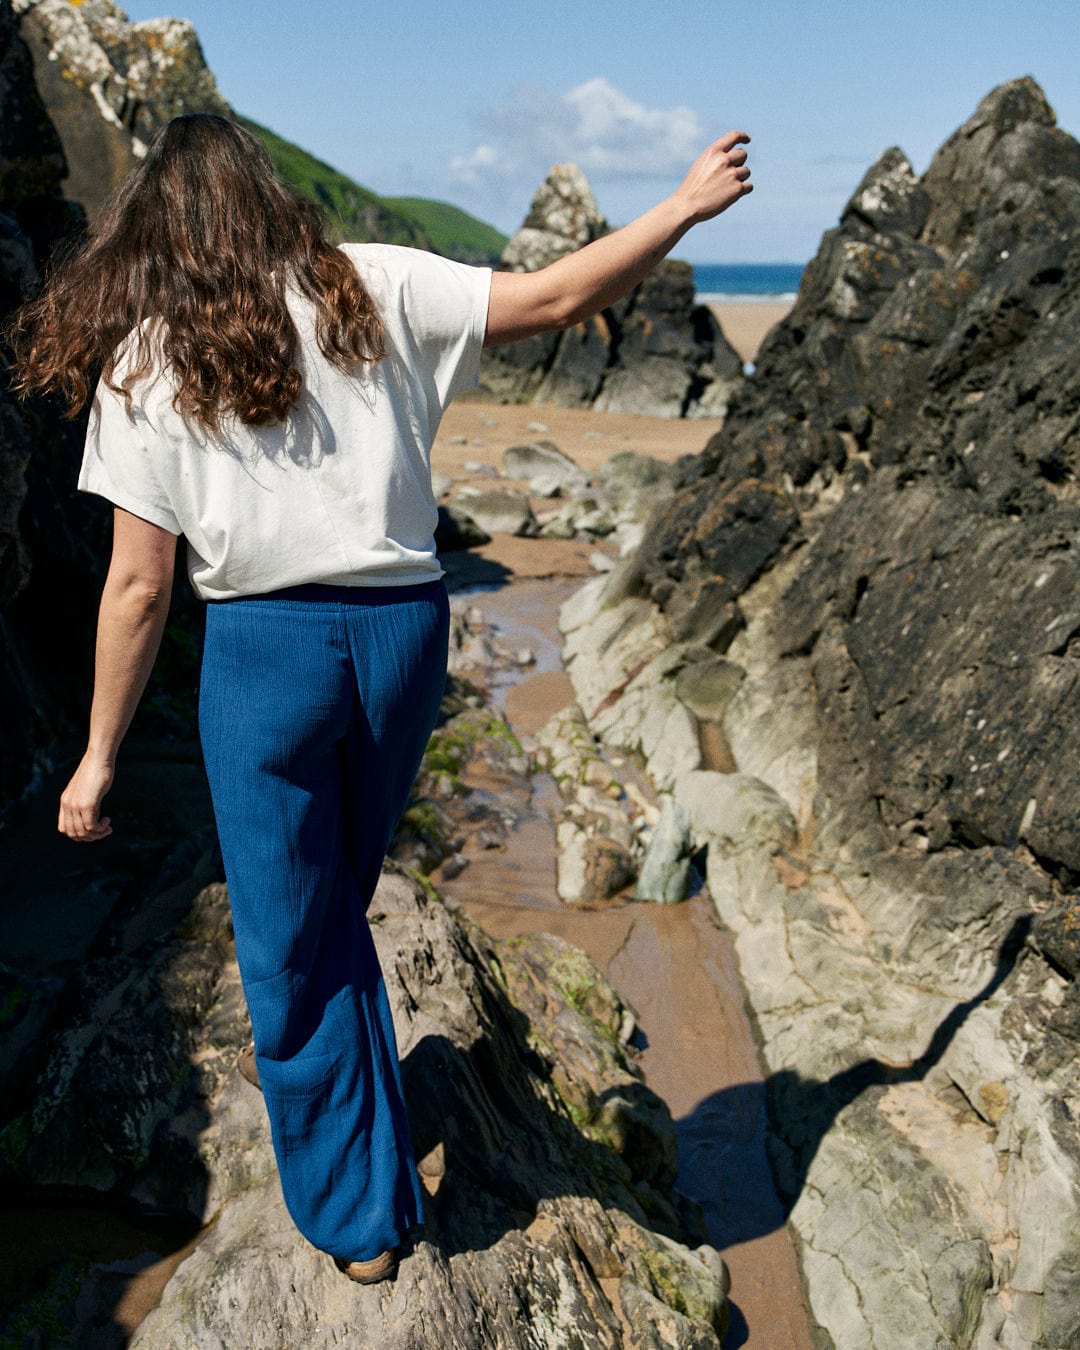 A person with long hair in a white shirt and Jonie - Womens Trouser - Blue from Saltrock walks over rocks near a beach with green hills and a blue sky in the background.